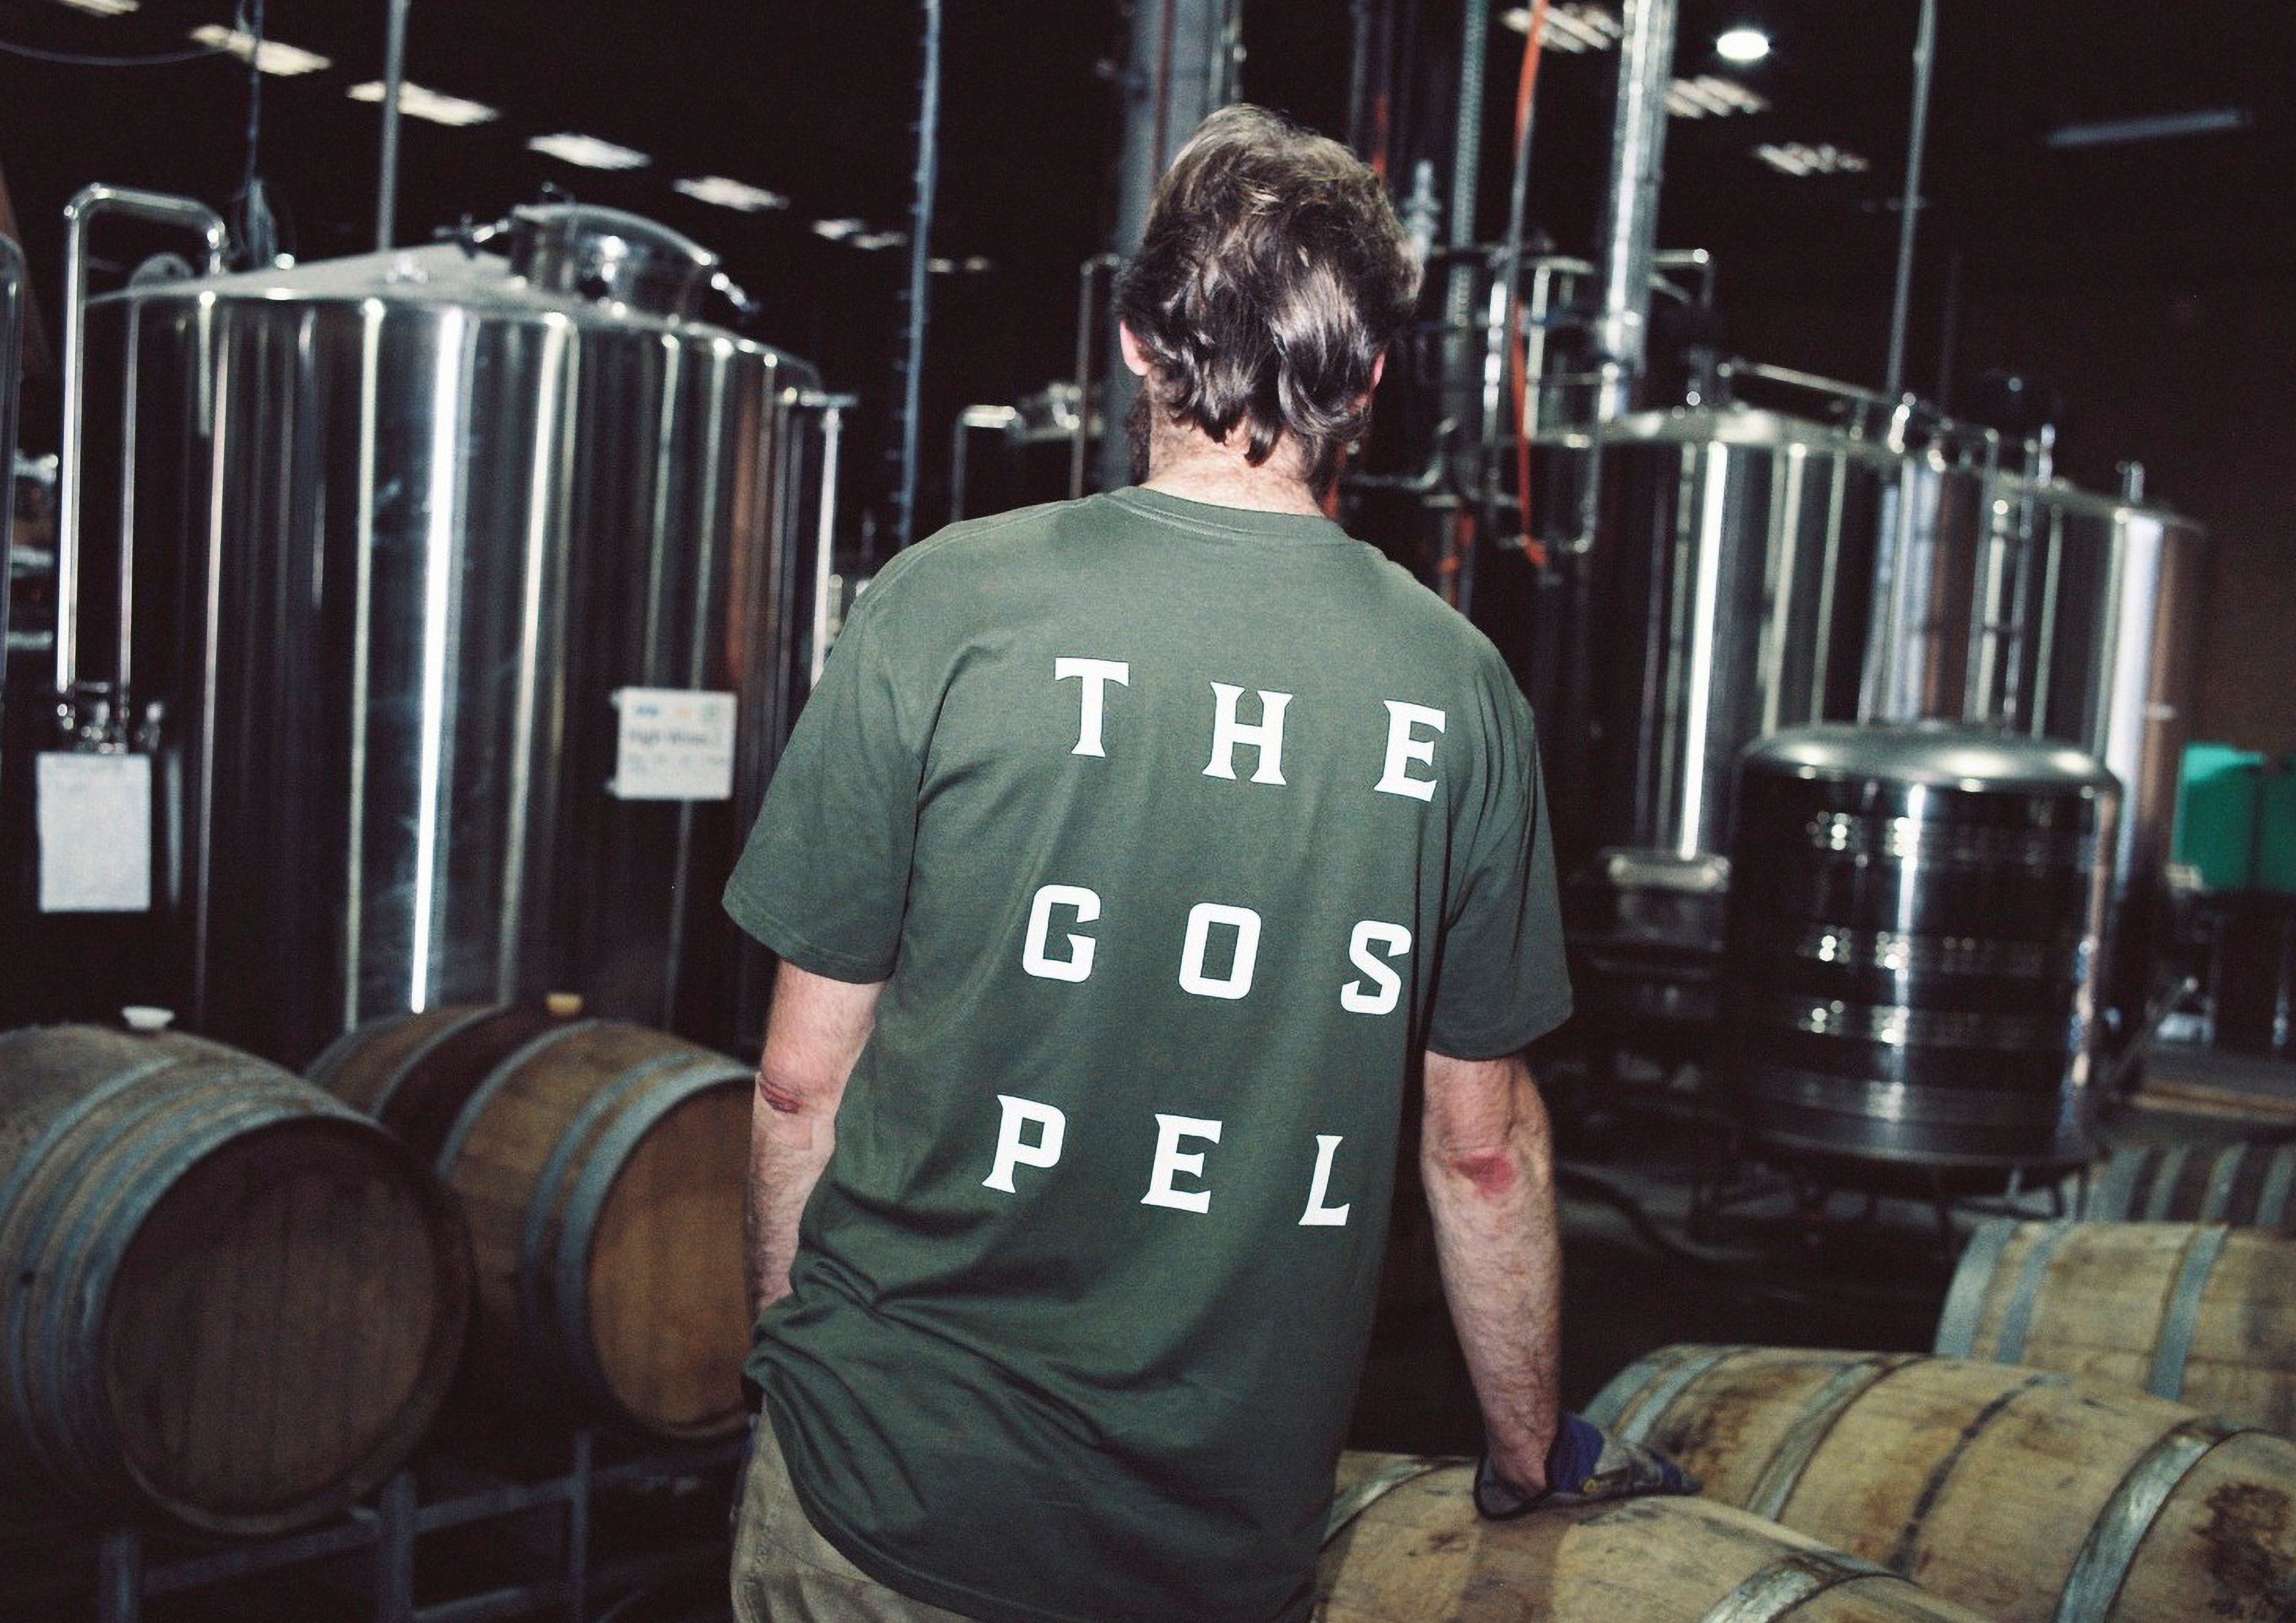 DDMMYY’s award-winning brand identity, packaging and custom typeface for Melbourne whiskey company The Gospel